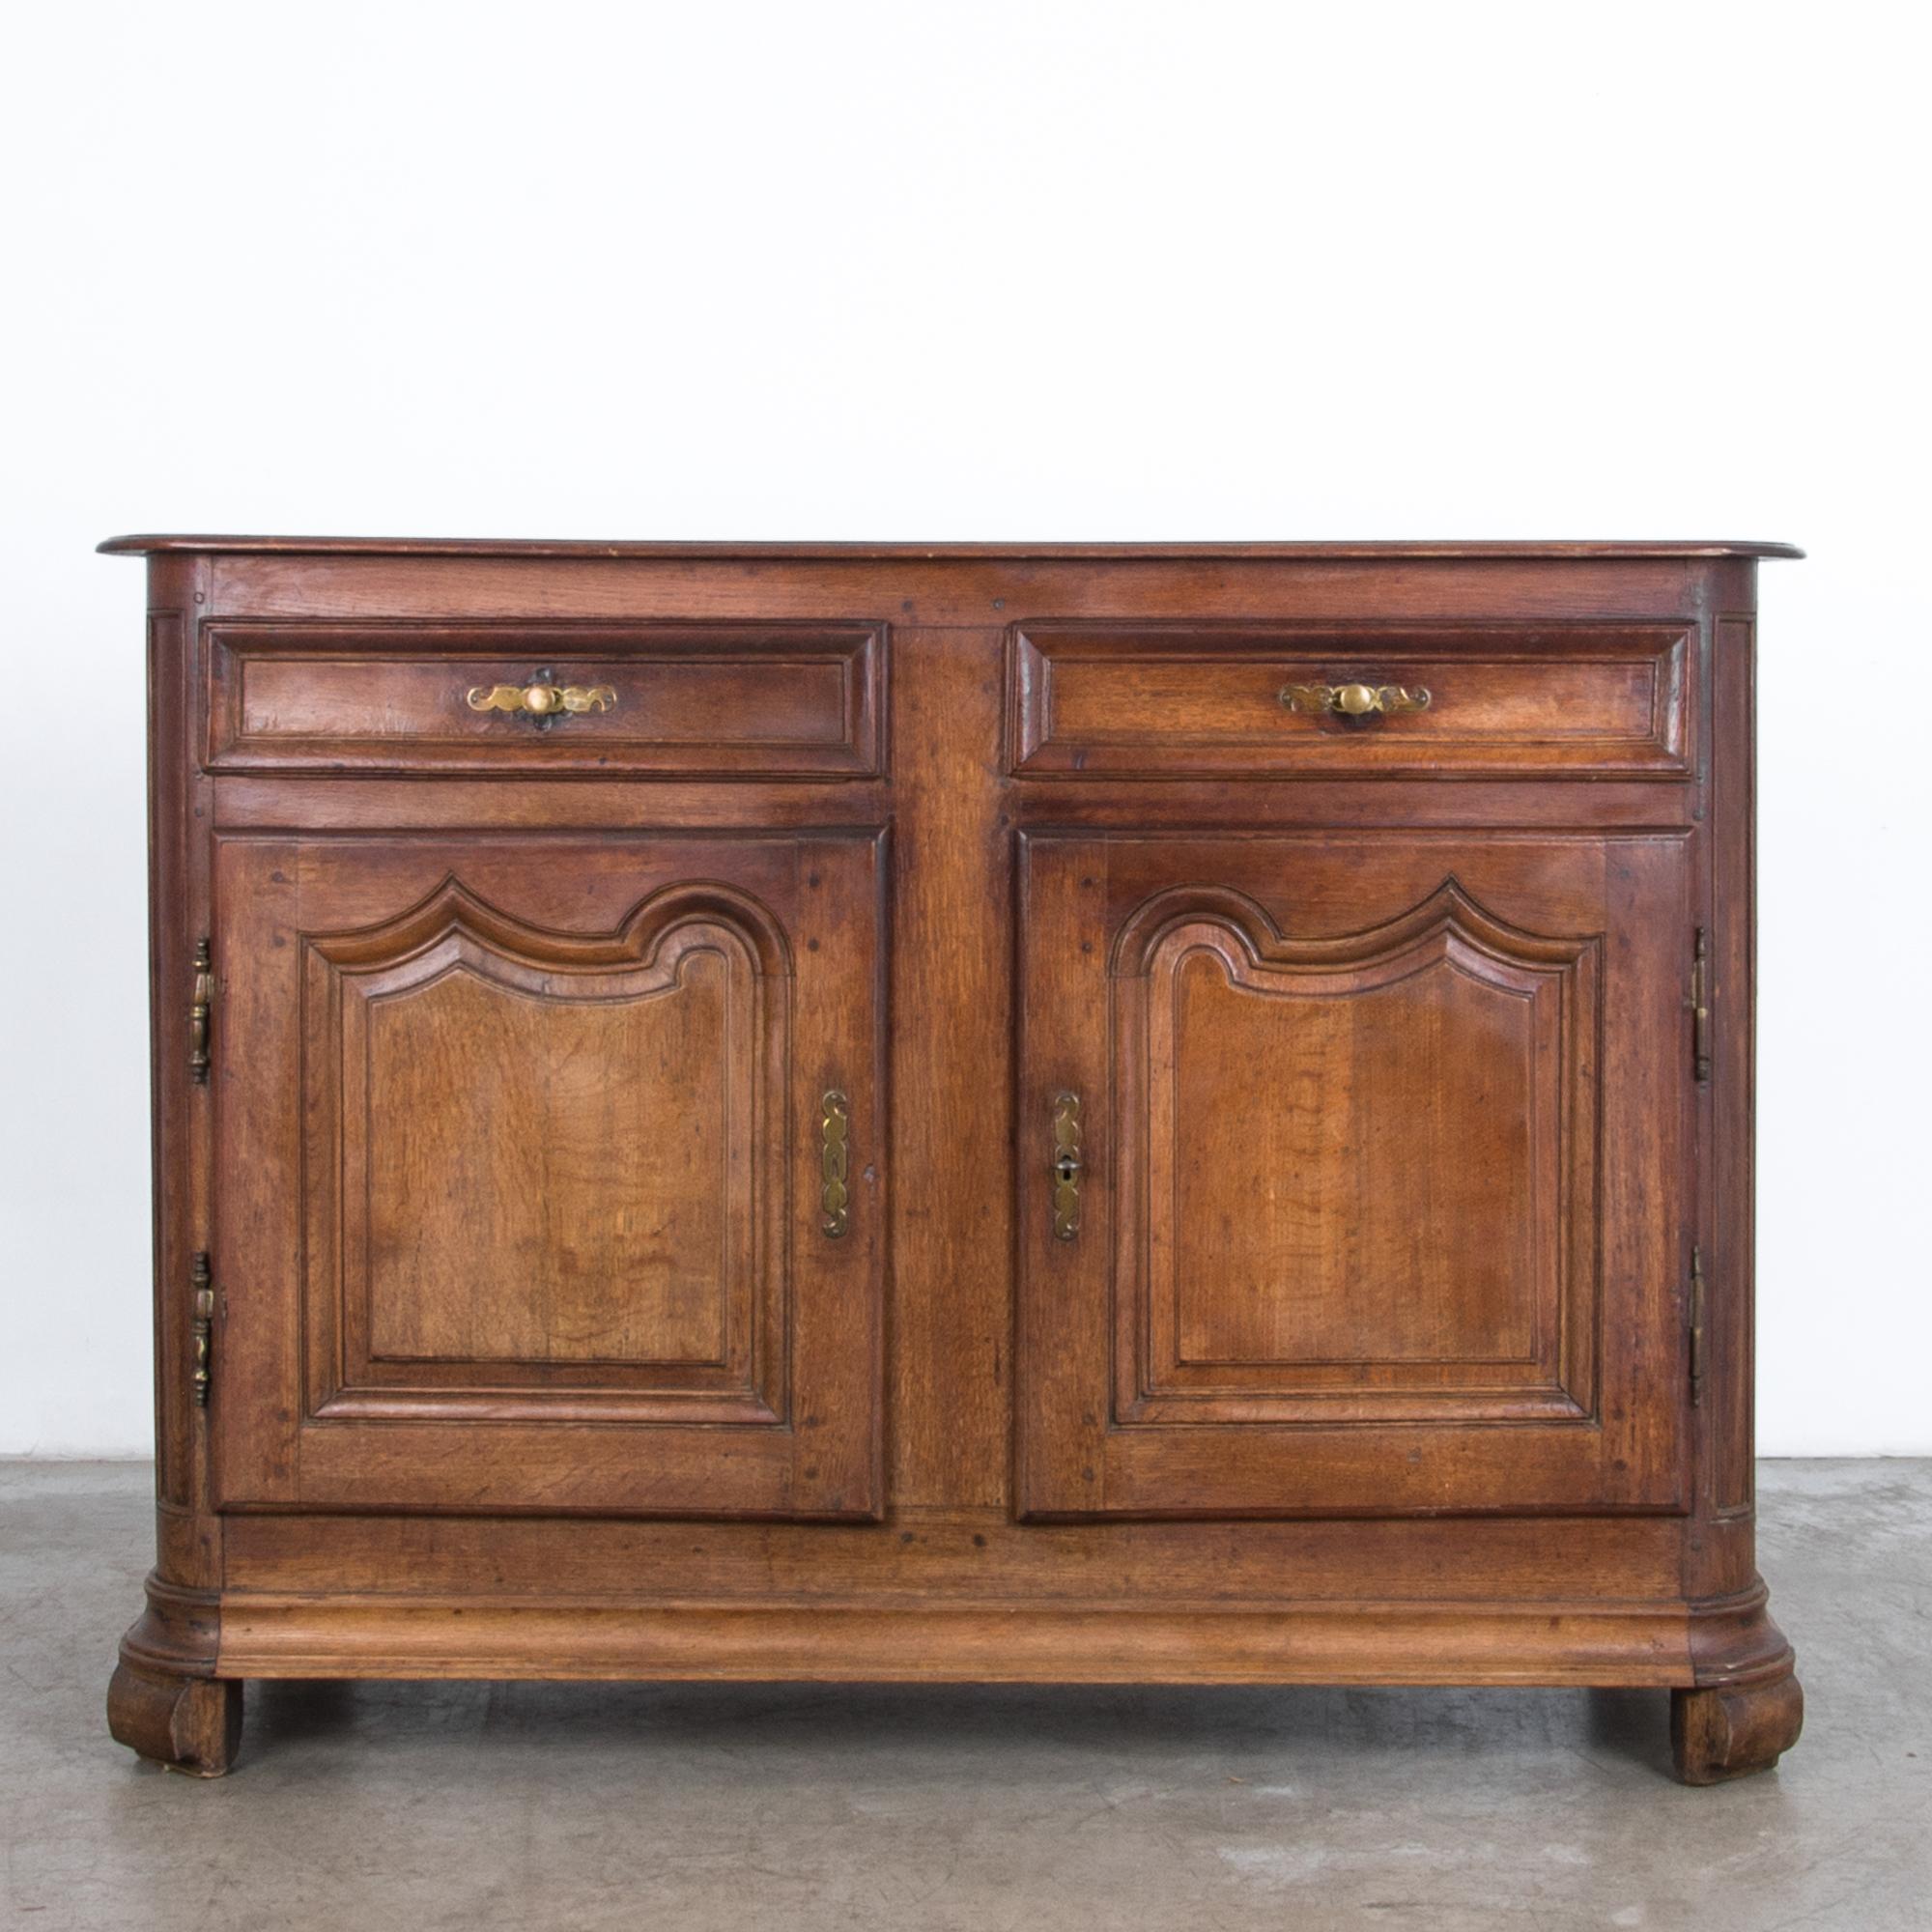 From circa 1800, a two-door and drawer cabinet in oak. A distinct approach typifies the casual yet refined aesthetic of the French countryside. Repolished through the ages, the warm translucent color enhances the texture of age and material, a